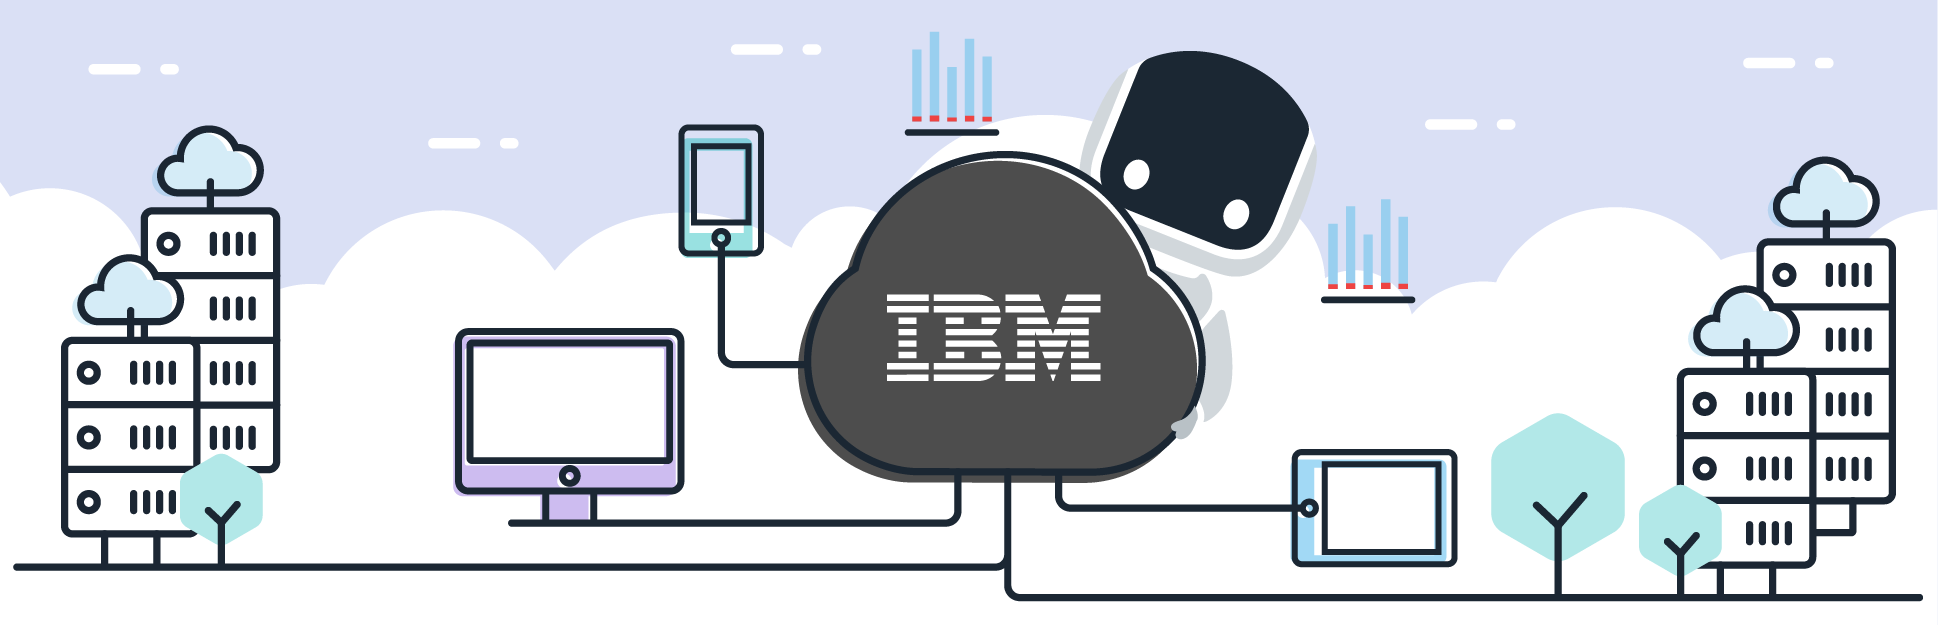 Introducing-the-First-Integration-of-Instanas-Enterprise-Observability-Platform-with-IBM-Watson-AIOps-01-png